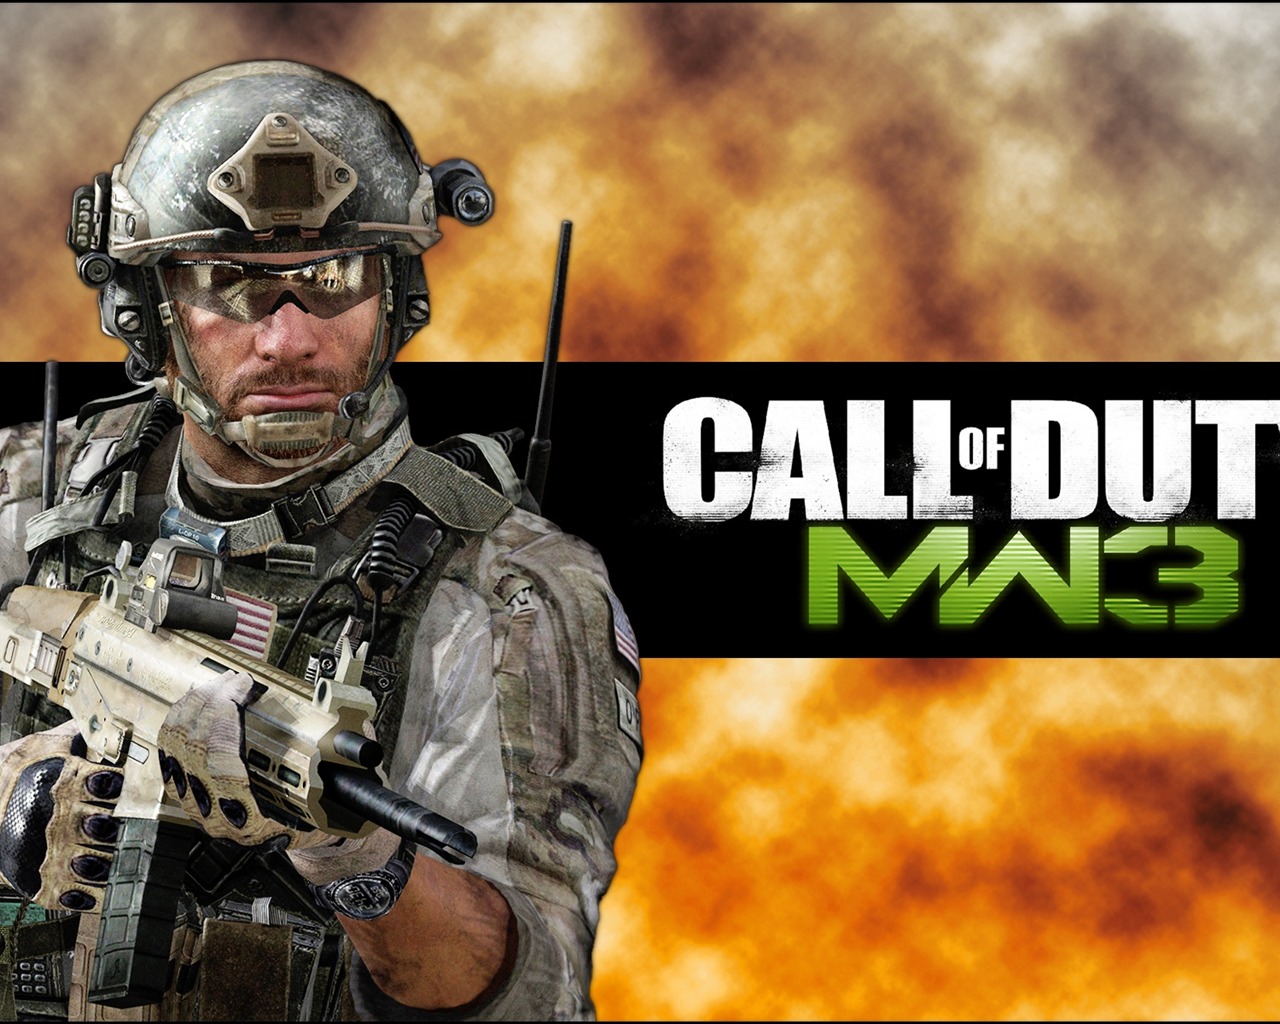 Call of Duty: MW3 HD wallpapers #14 - 1280x1024